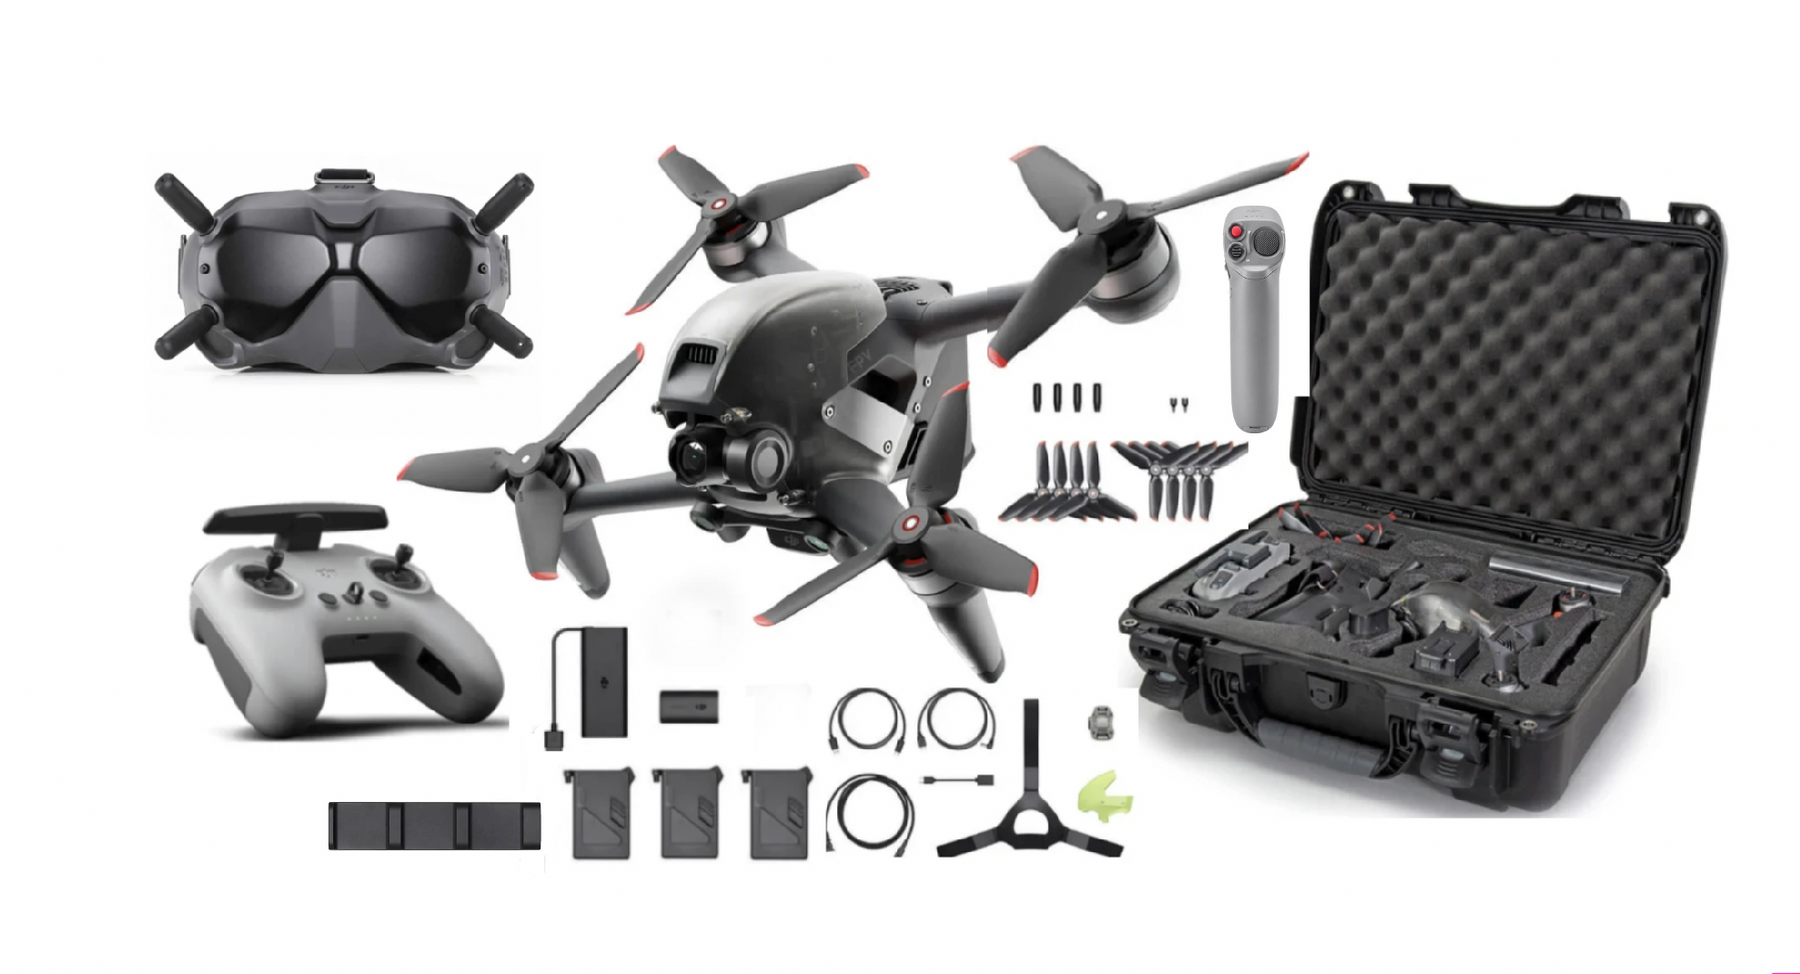 DJI FPV Combo Camera Drone - CP.FP.00000001.01 for sale online